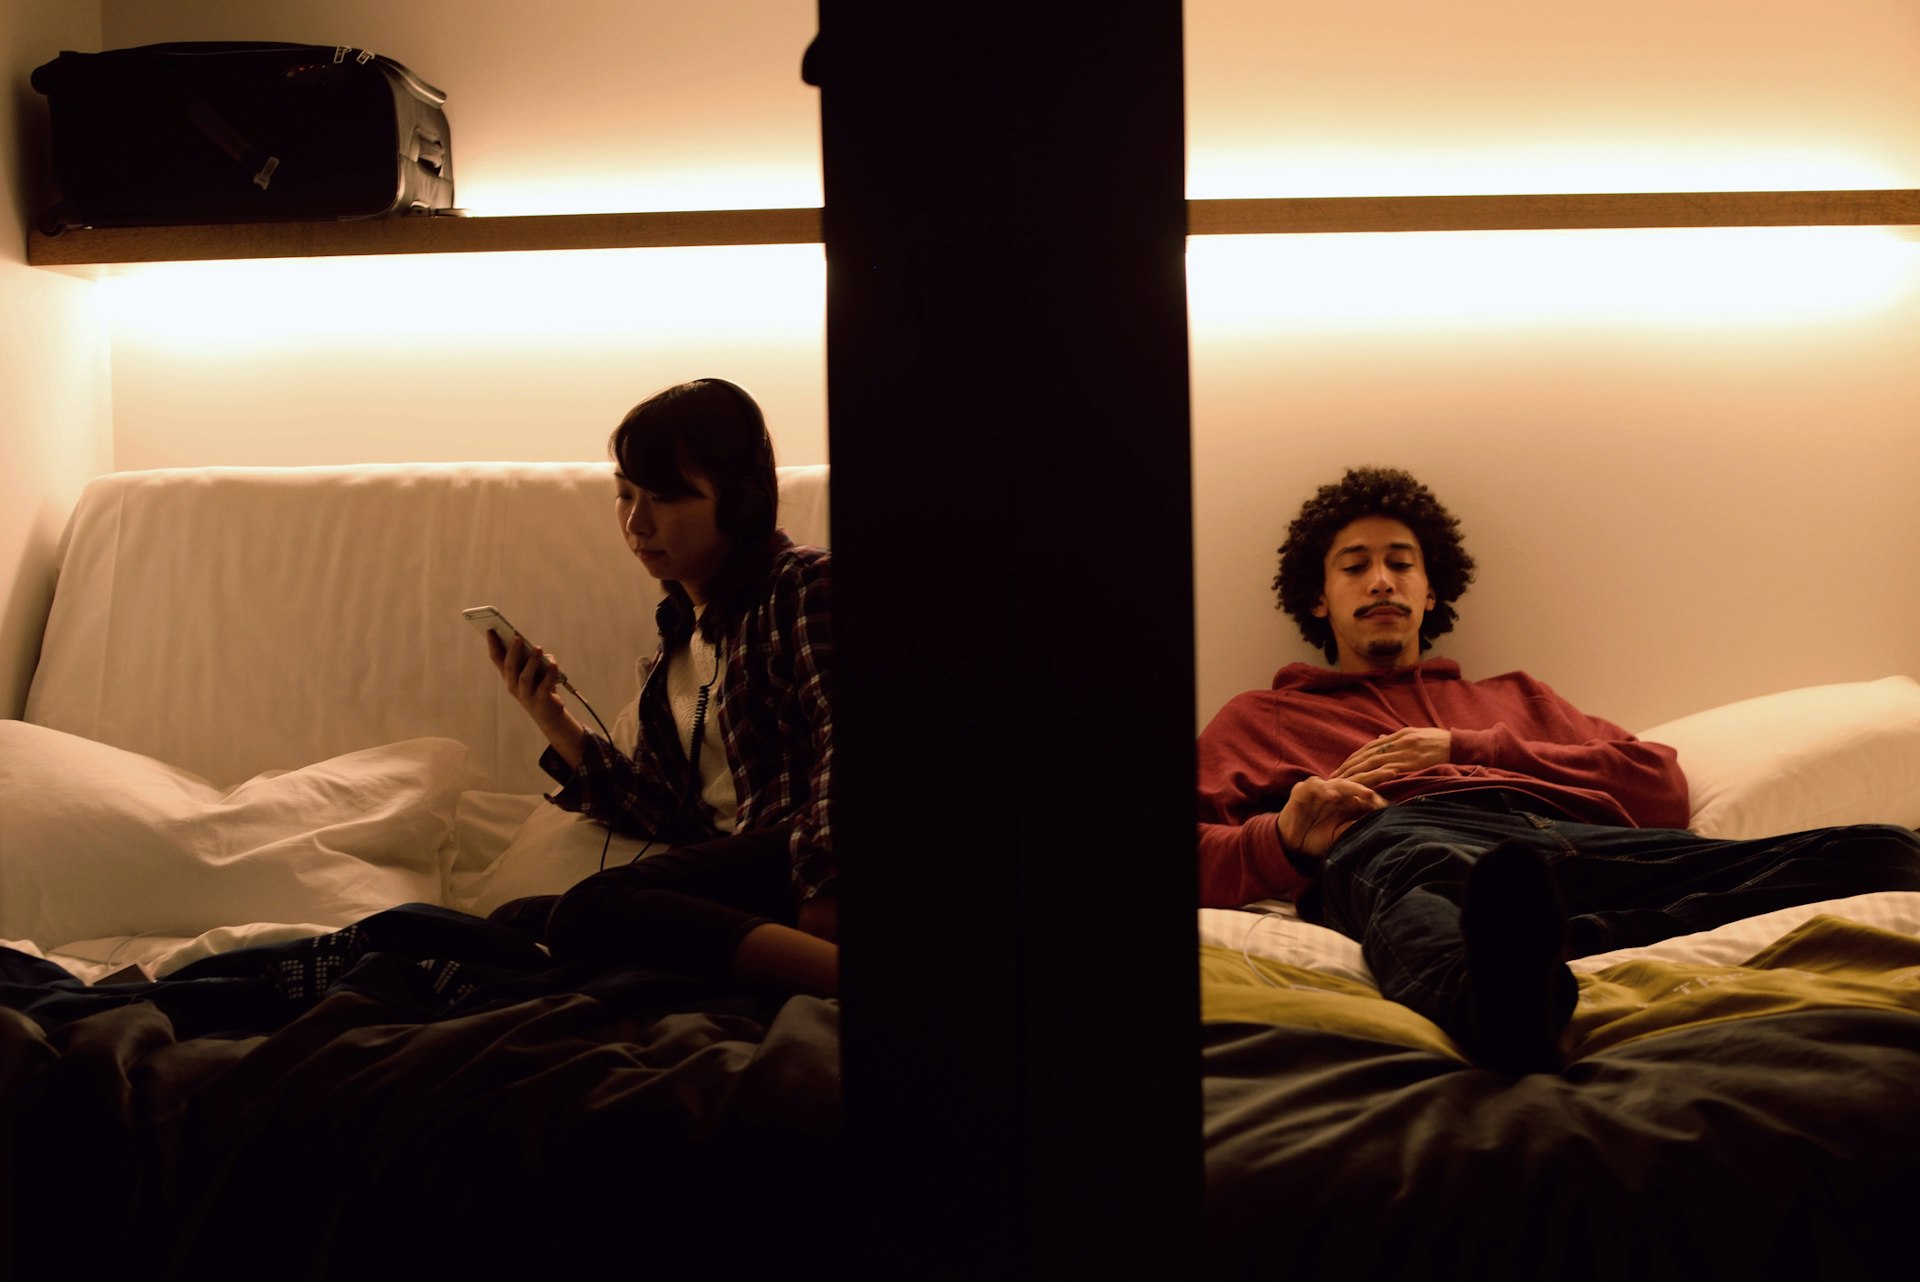 Two people sat in their capsule rooms in a capsule hotel. The bed fills the space with a shelf above to put belongings on